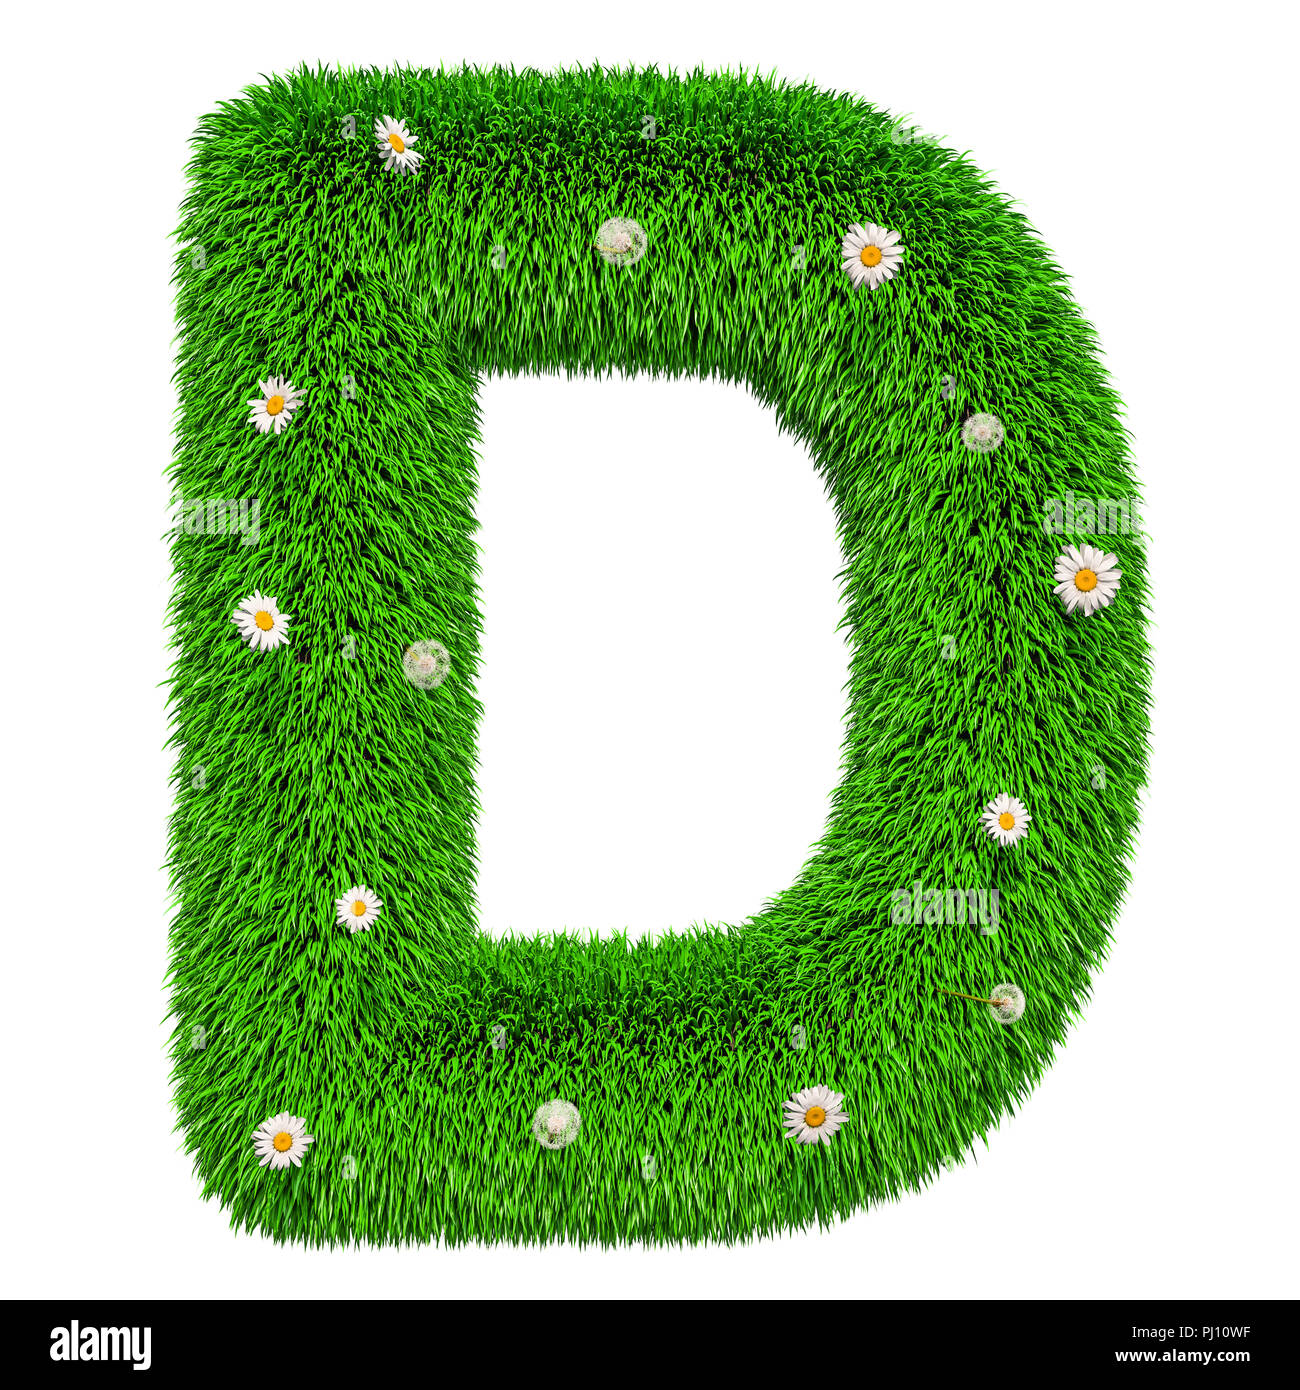 Green grassy letter D with flowers, 3D rendering isolated on white background Stock Photo